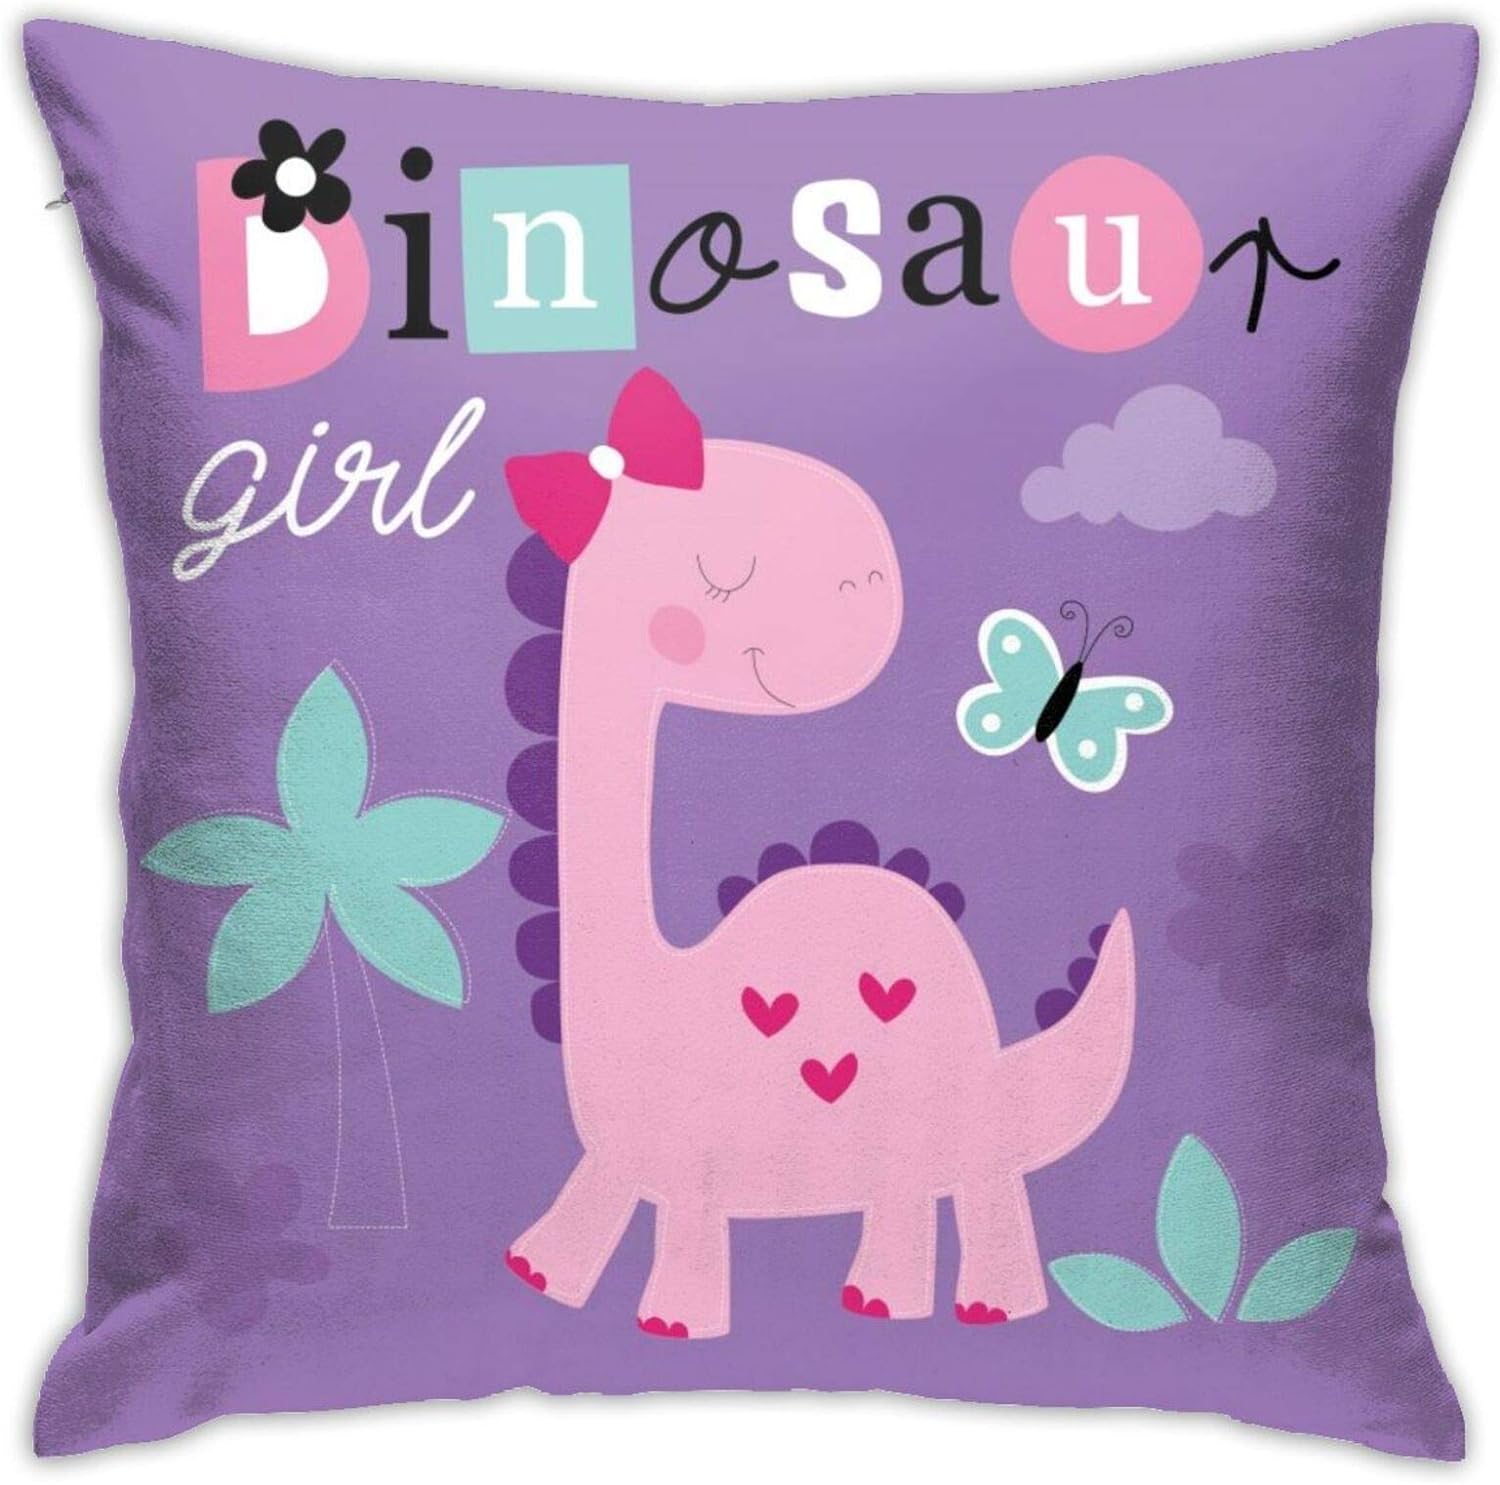 Cute Dinosaur Girl Decorative Throw Pillow Cushion Covers 18x18inchs for Kids,Pink Baby Cartoon Throw Pillow Cases for Couch Bedroom Car(Colorful Dino)